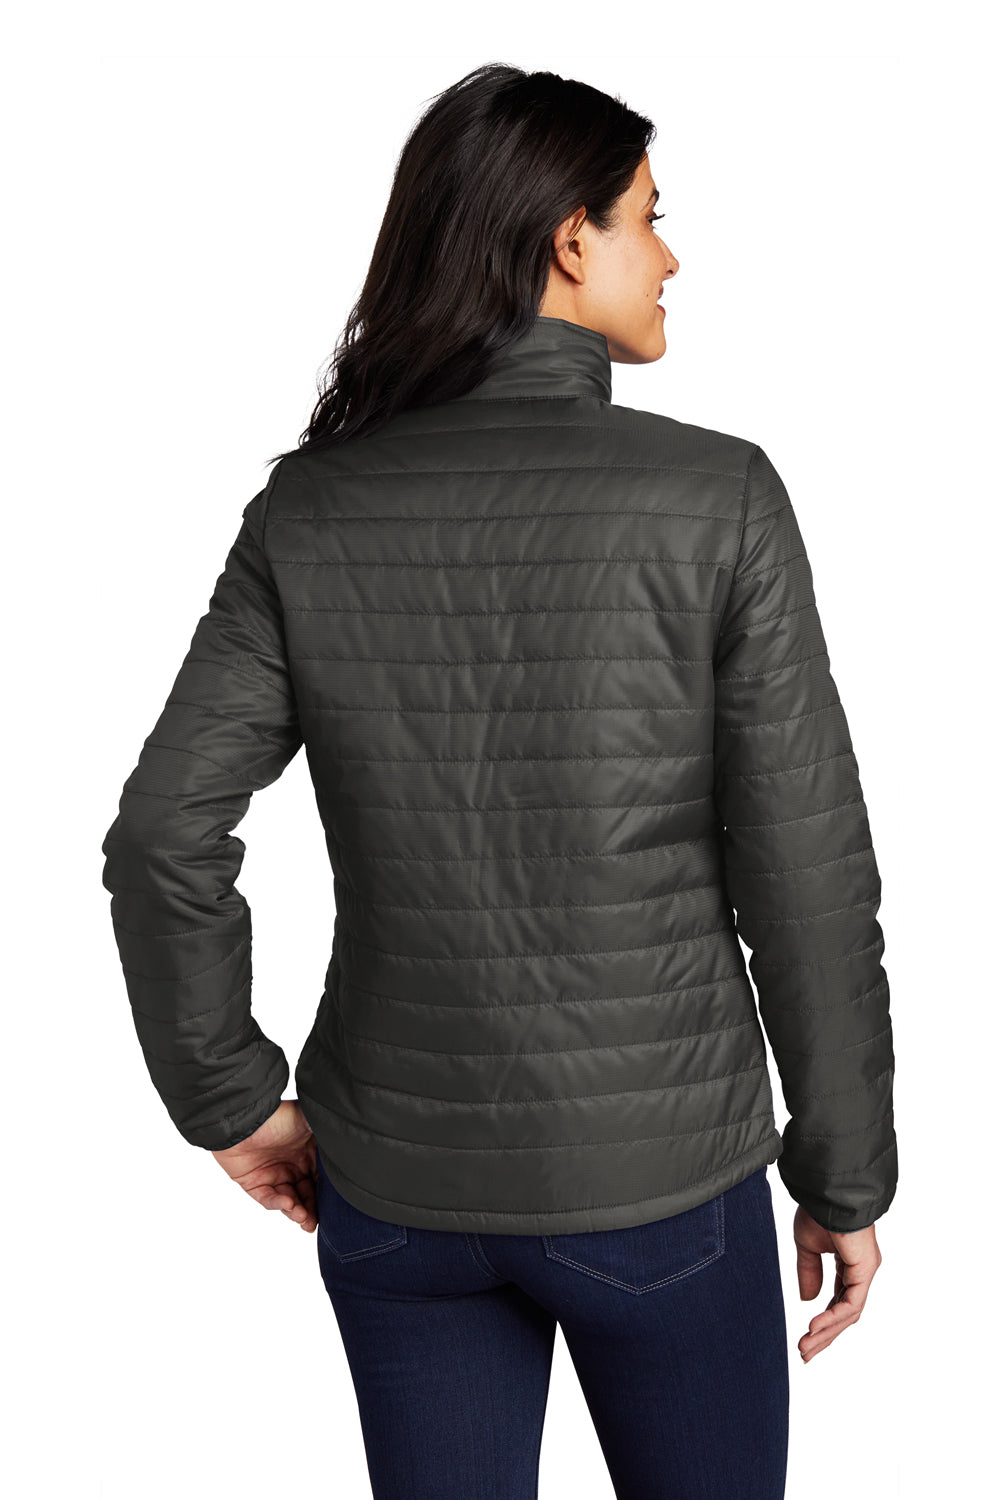 Port Authority Womens Packable Puffy Full Zip Jacket Sterling Grey/Graphite Grey Side